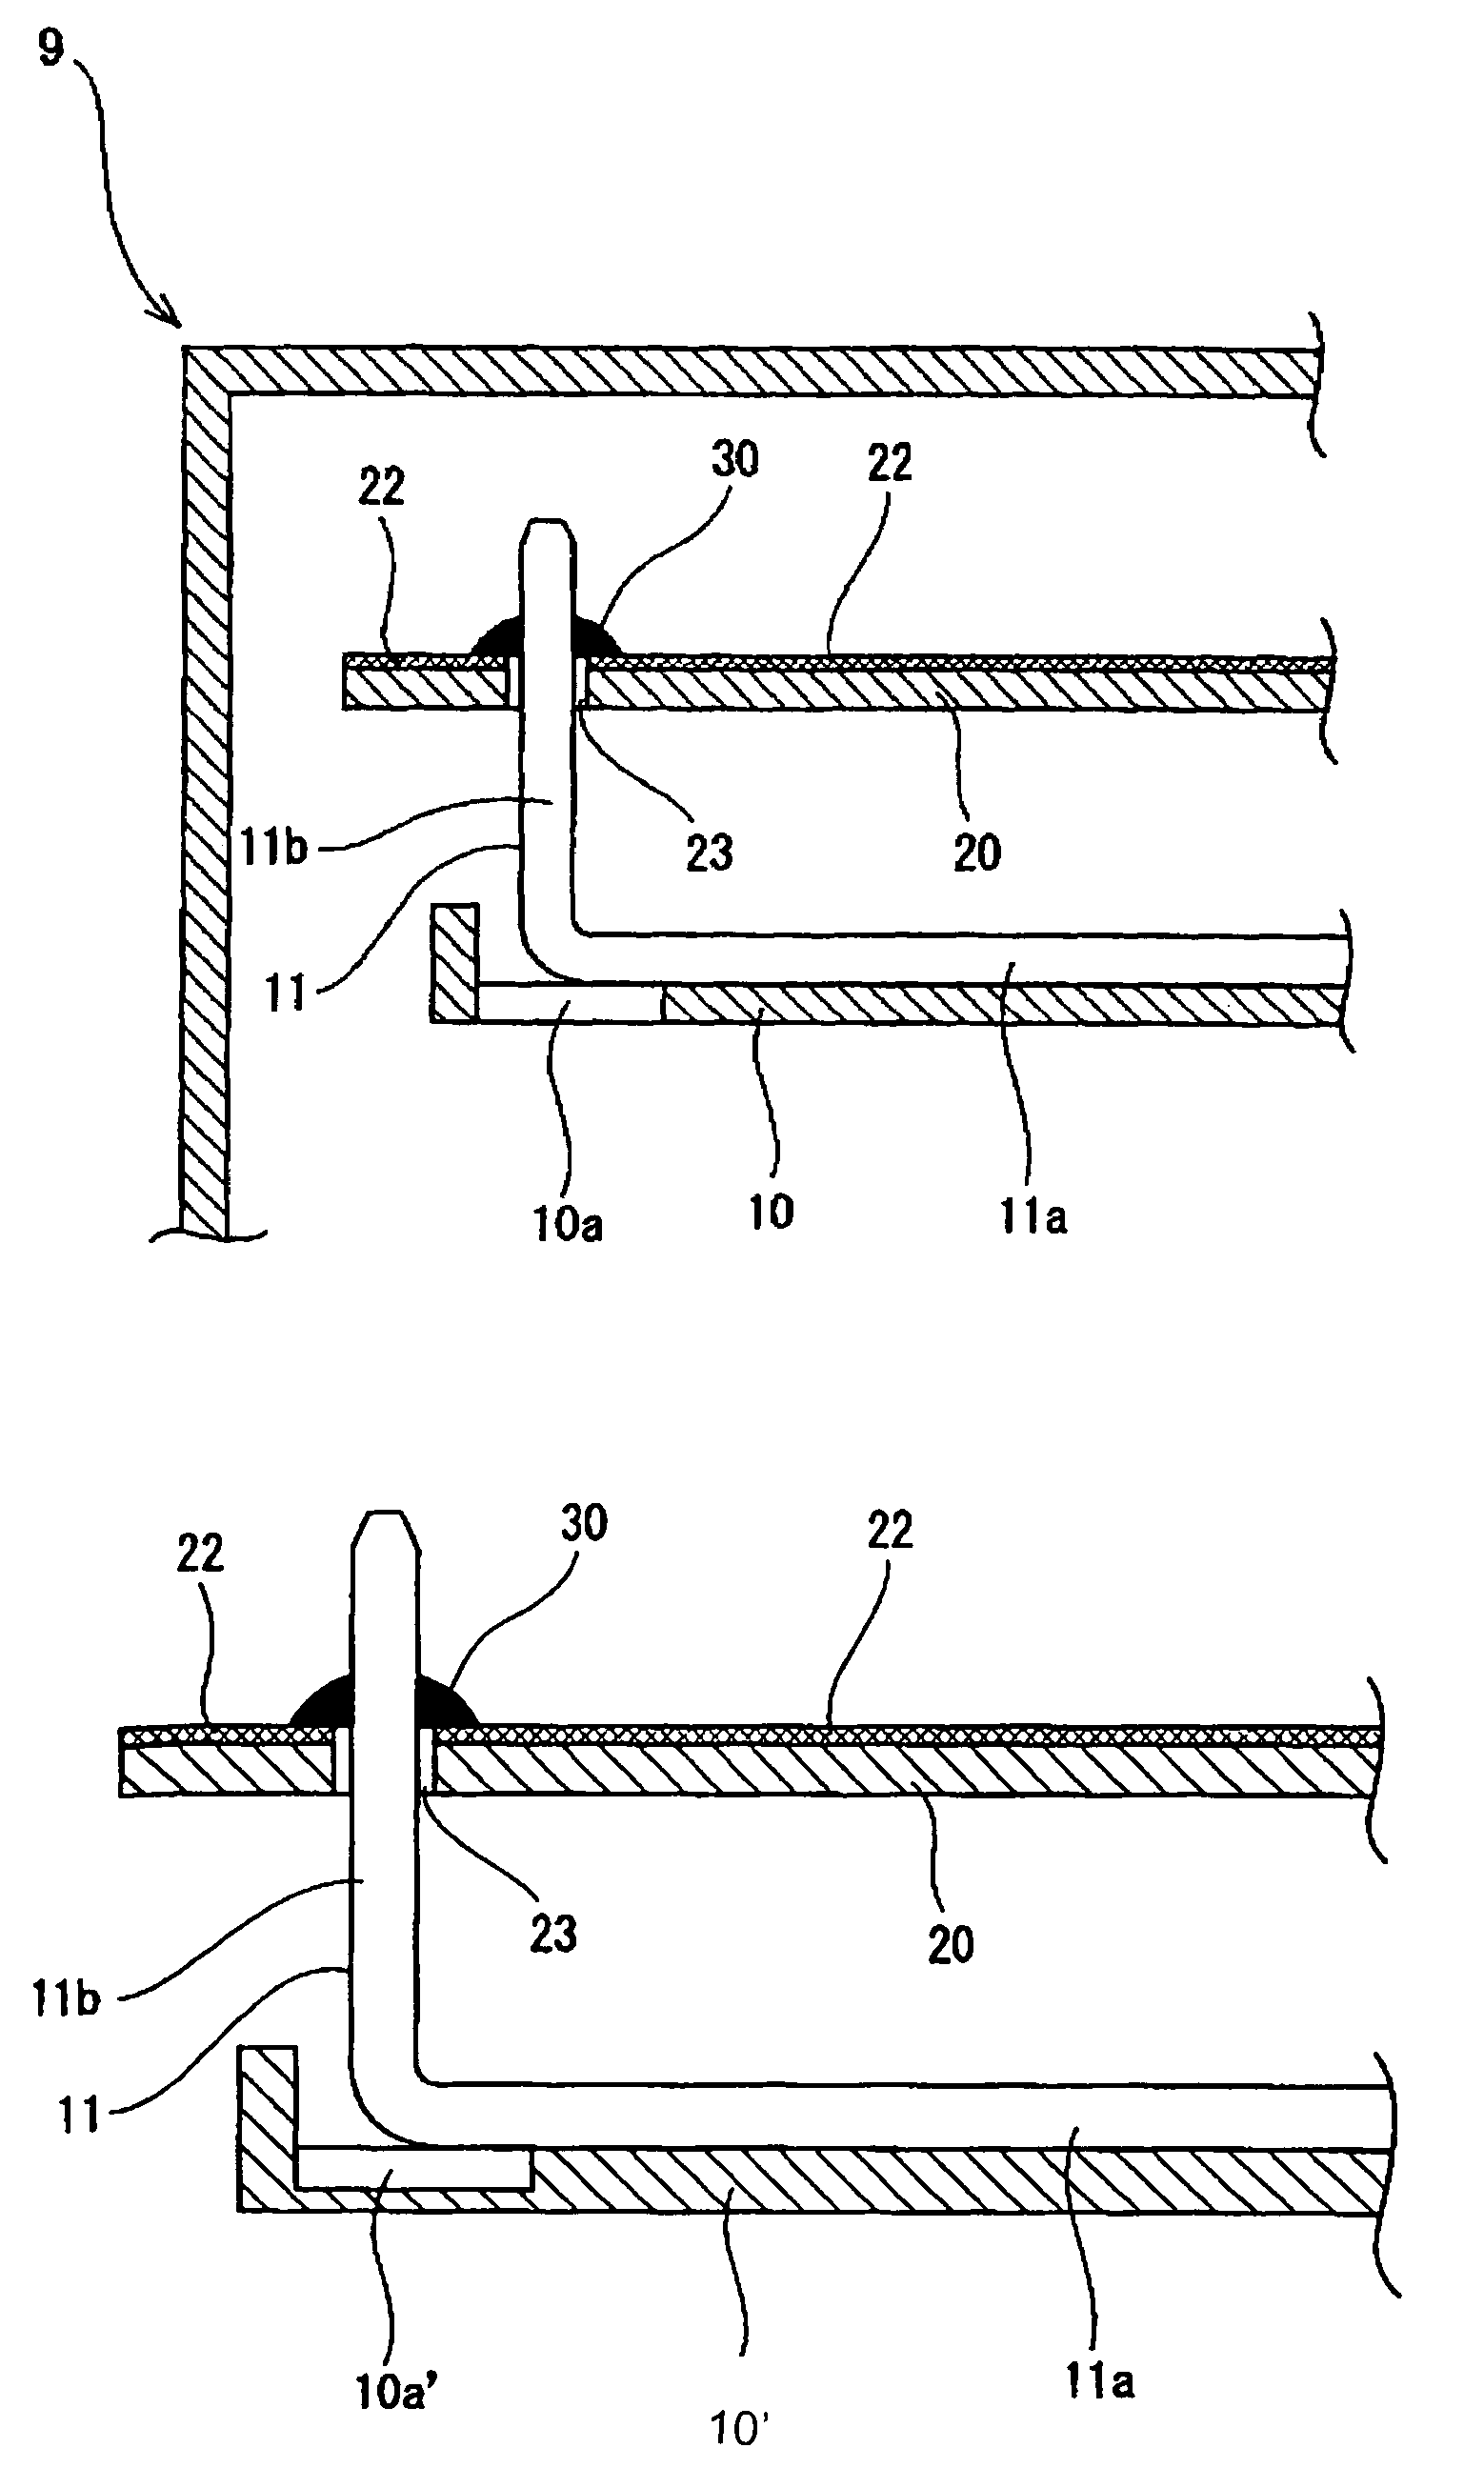 Soldering structure between a tab of a bus bar and a printed substrate